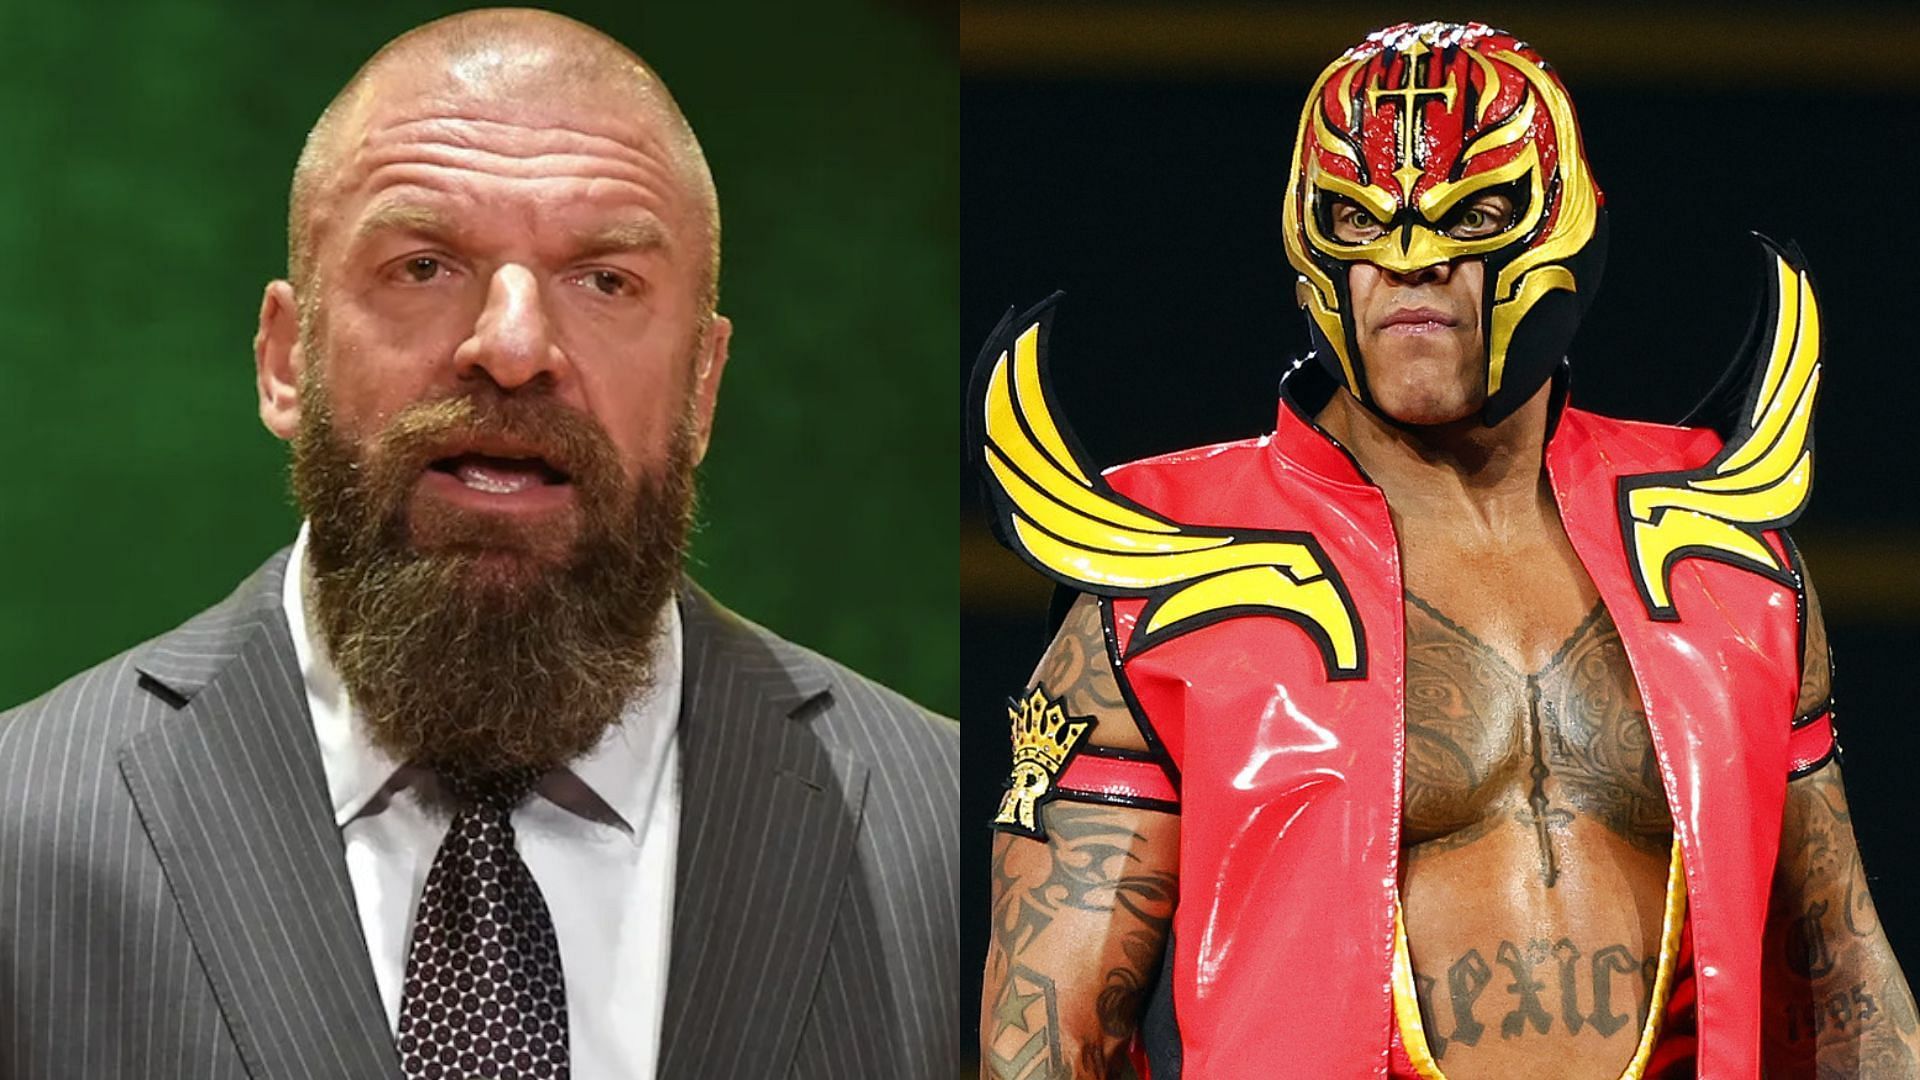 WWE CCO Triple H (left) and WWE Hall of Famer Rey Mysterio (right)